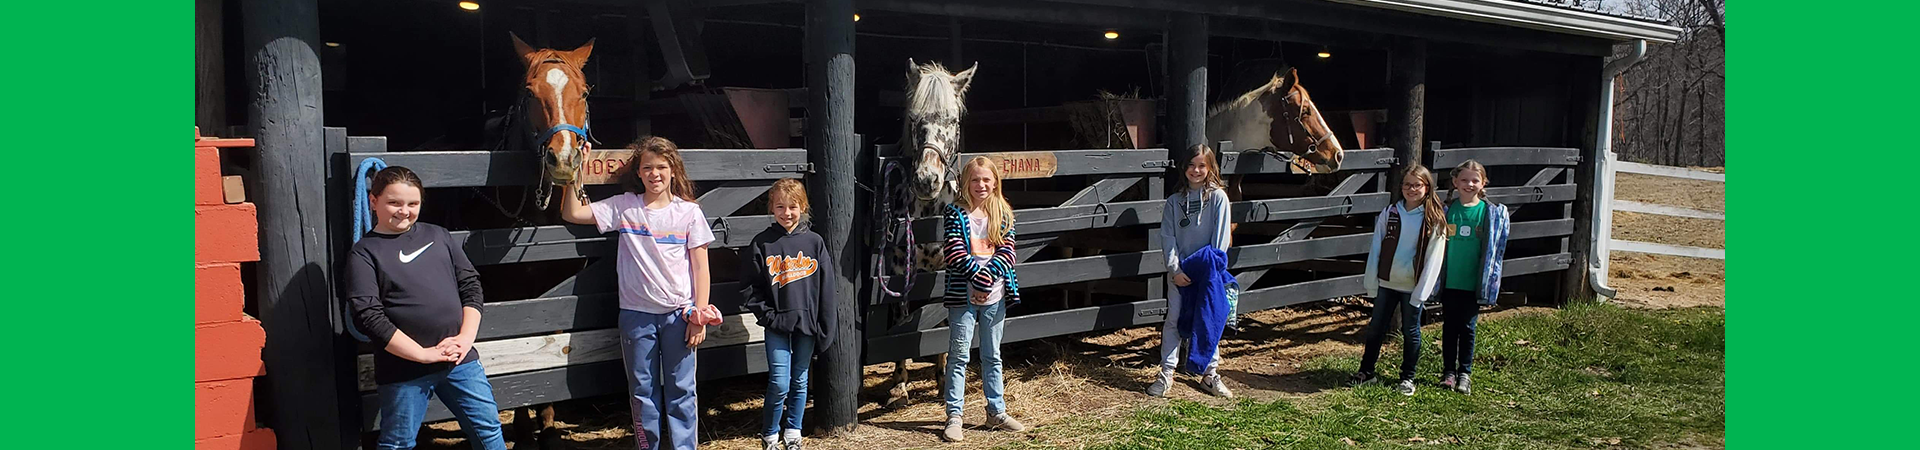  girl scouts at a barn posing for a photo with horses 